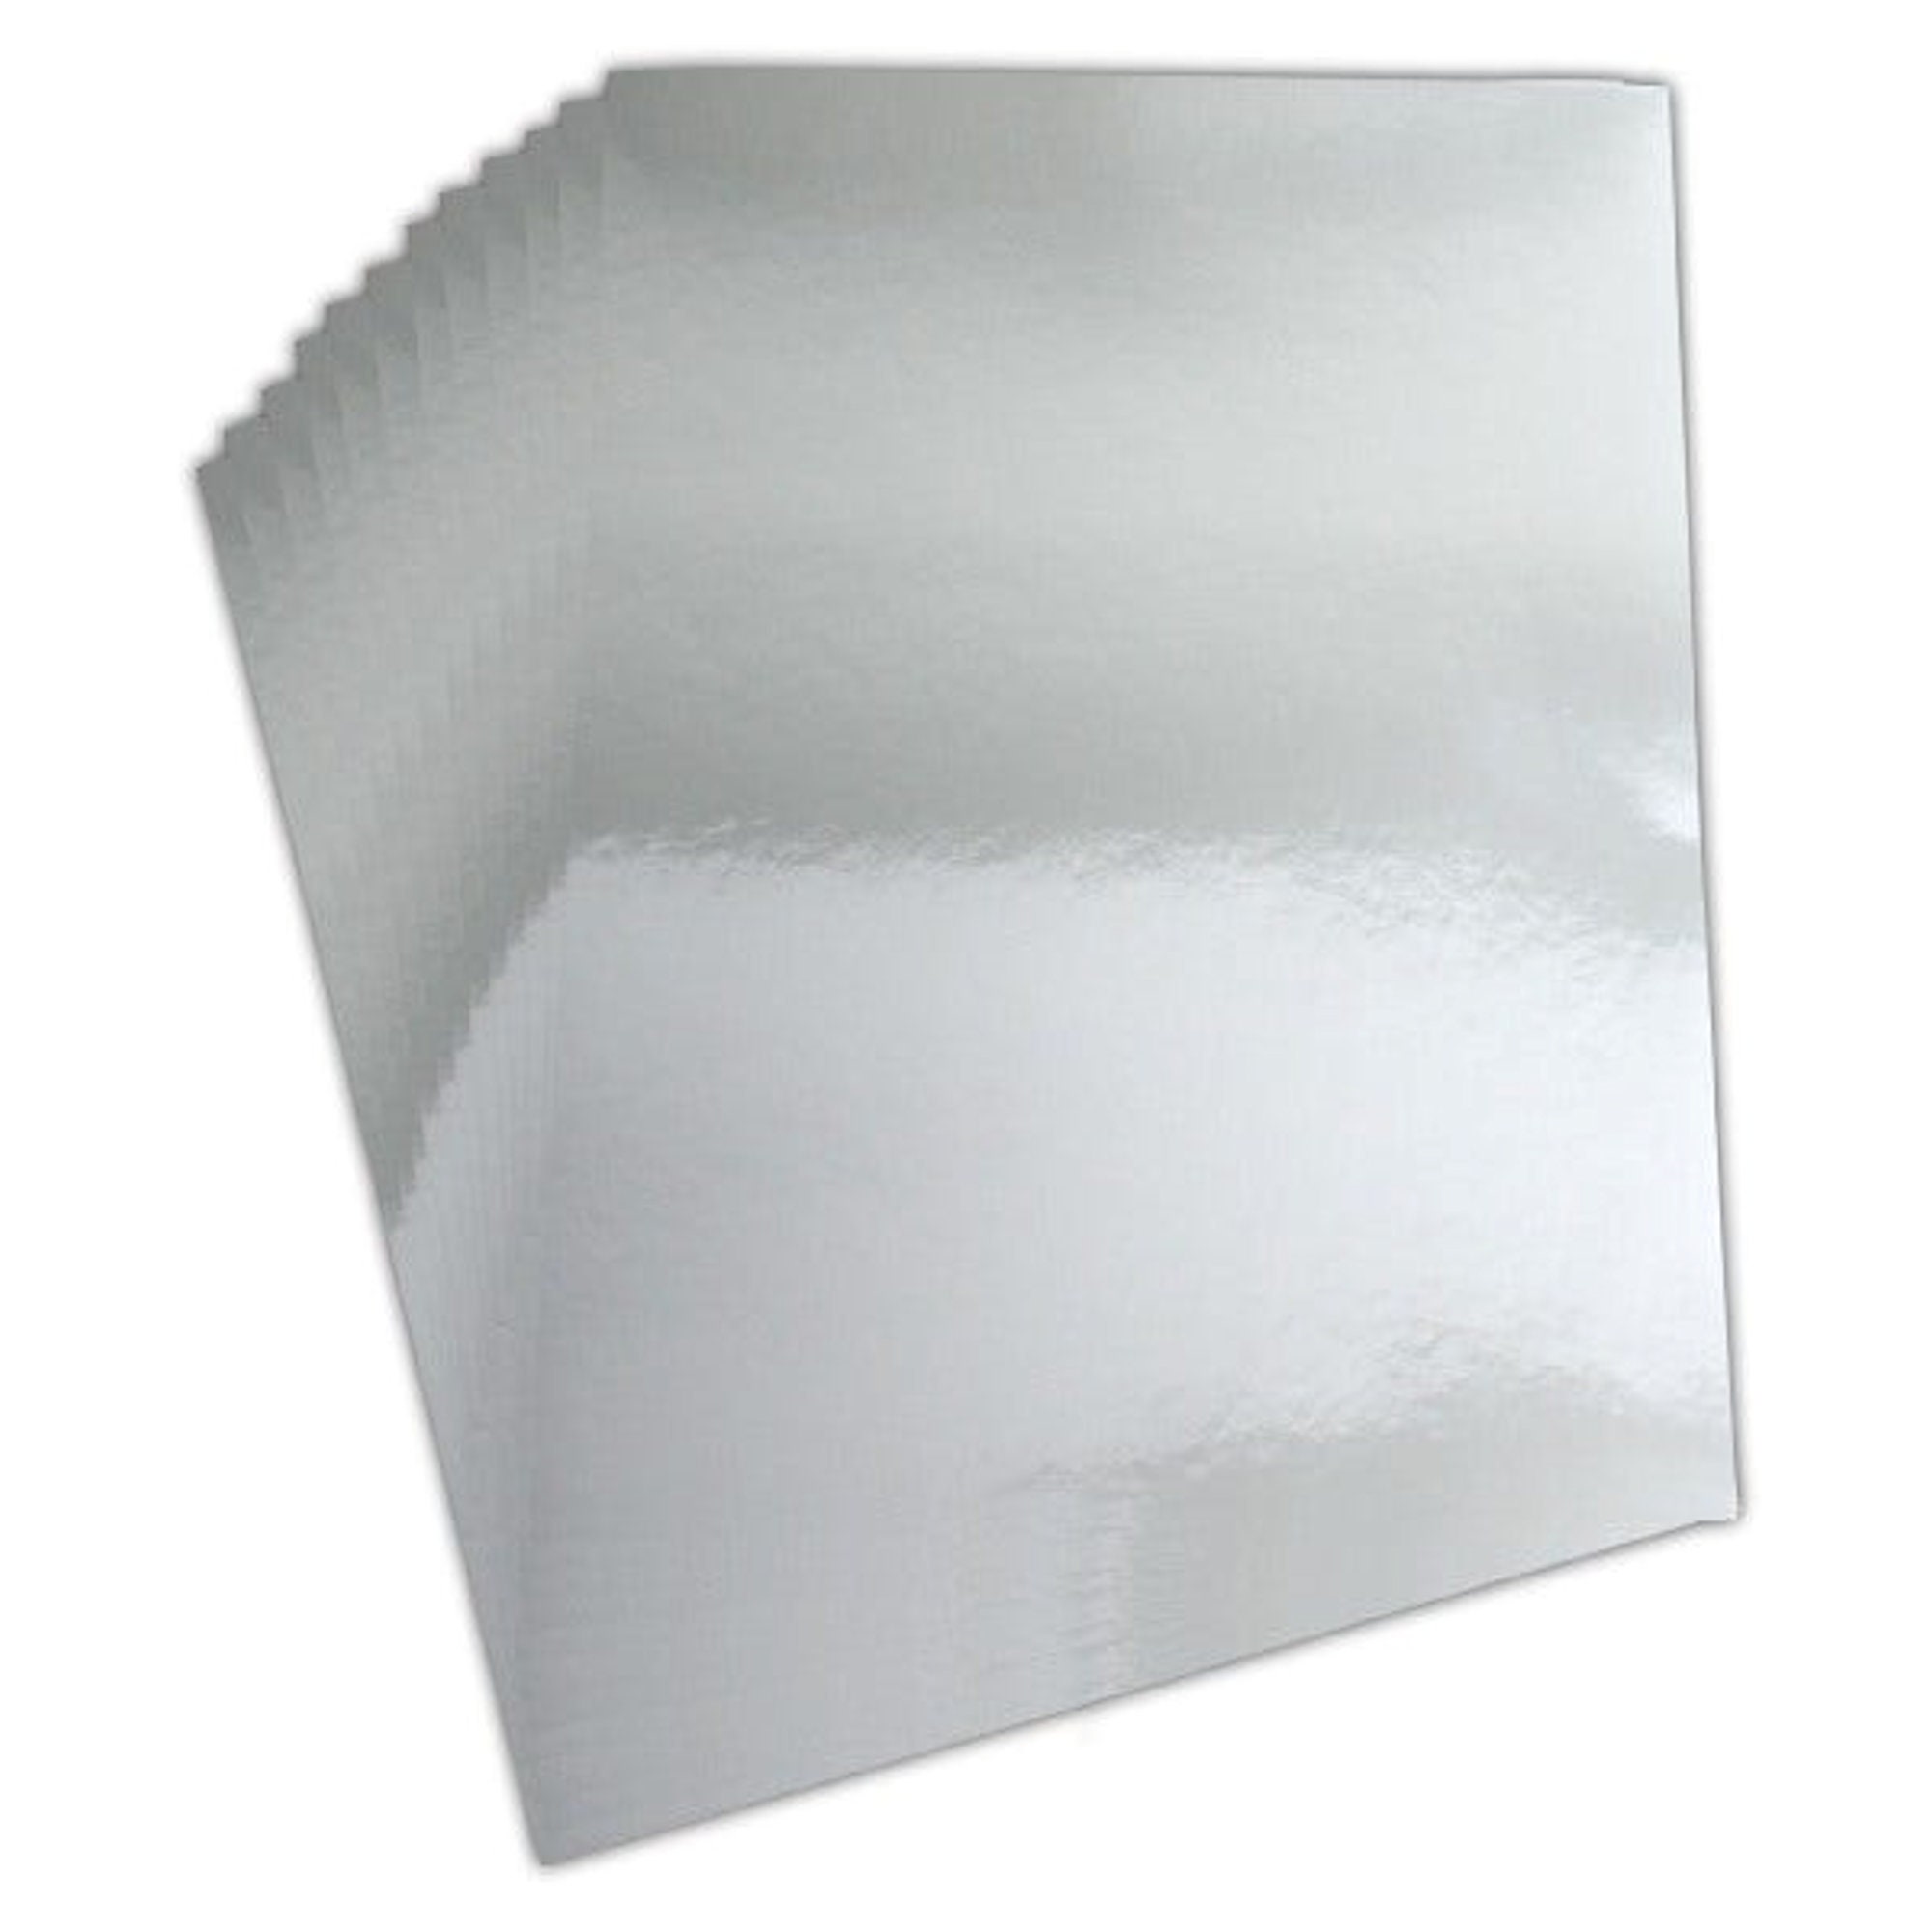 TRUArt Silver Card Stock Metallic Embossing Foil Sheets (8 x 12 inches, 20  sheets)